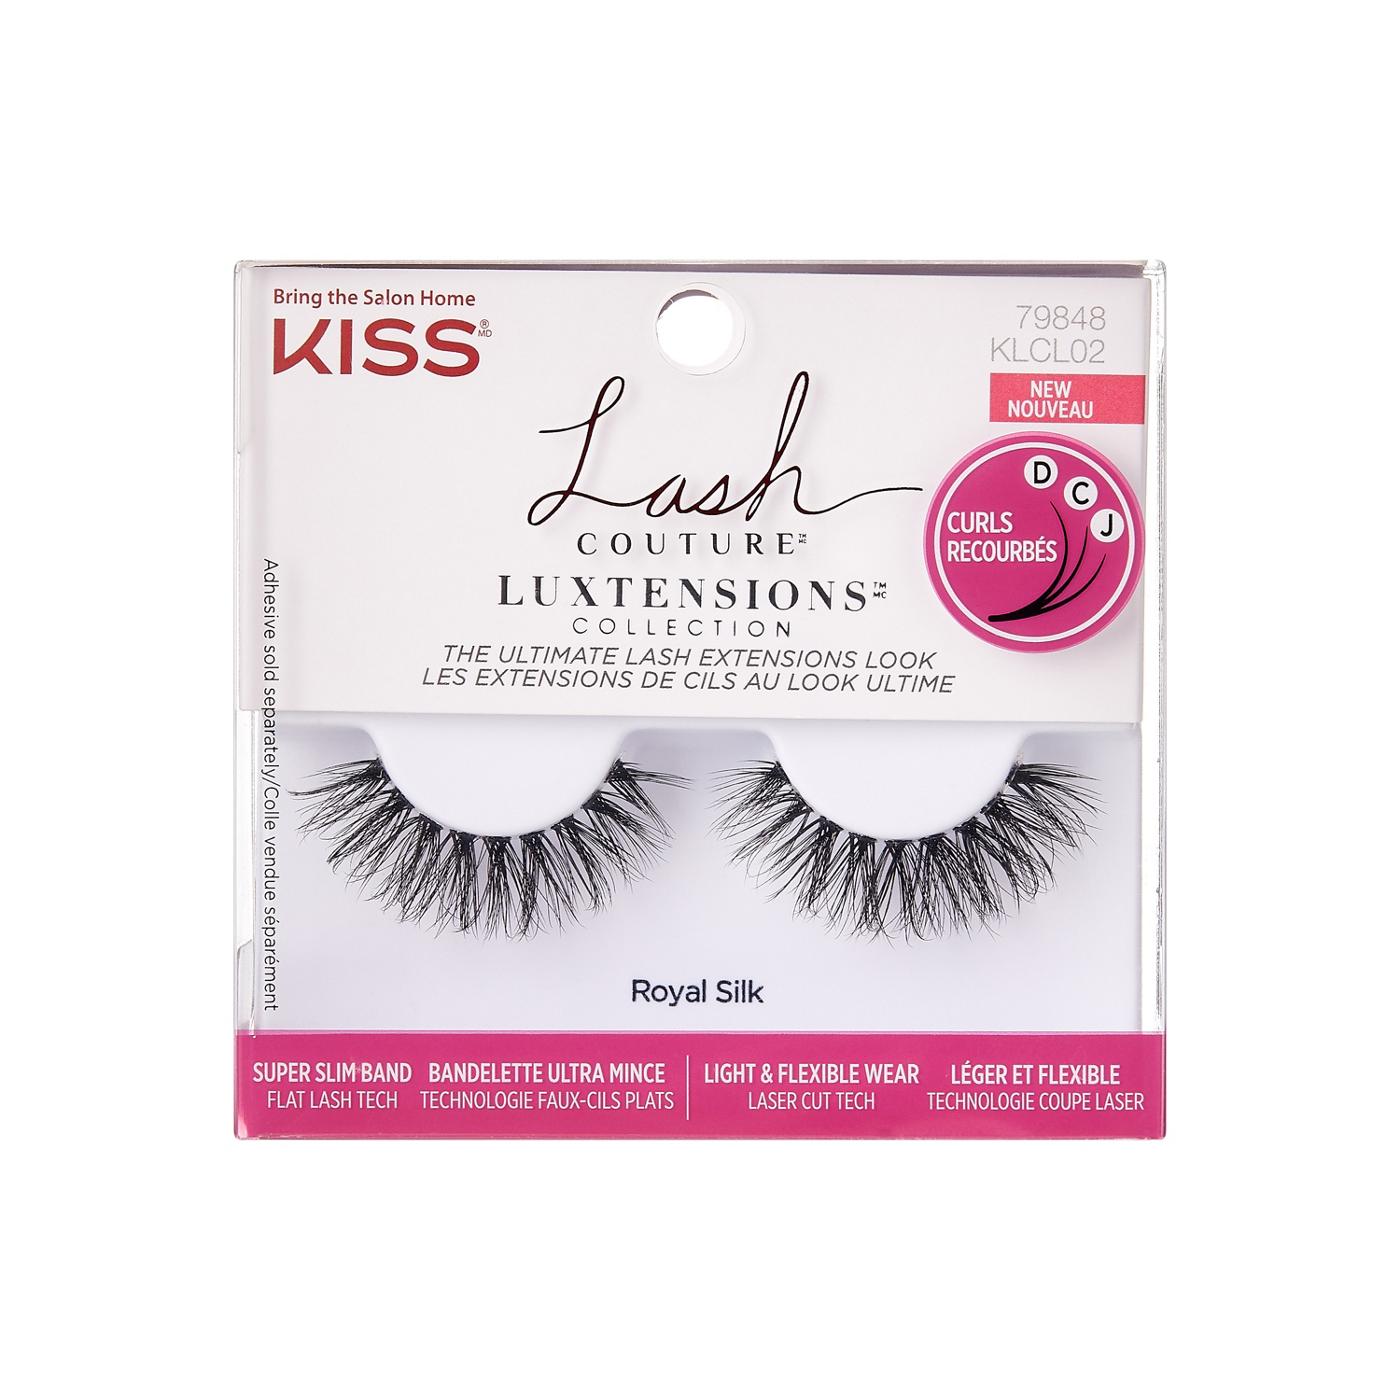 KISS Lash Couture Luxtensions Collection Eyelashes - Royal Silk; image 1 of 7